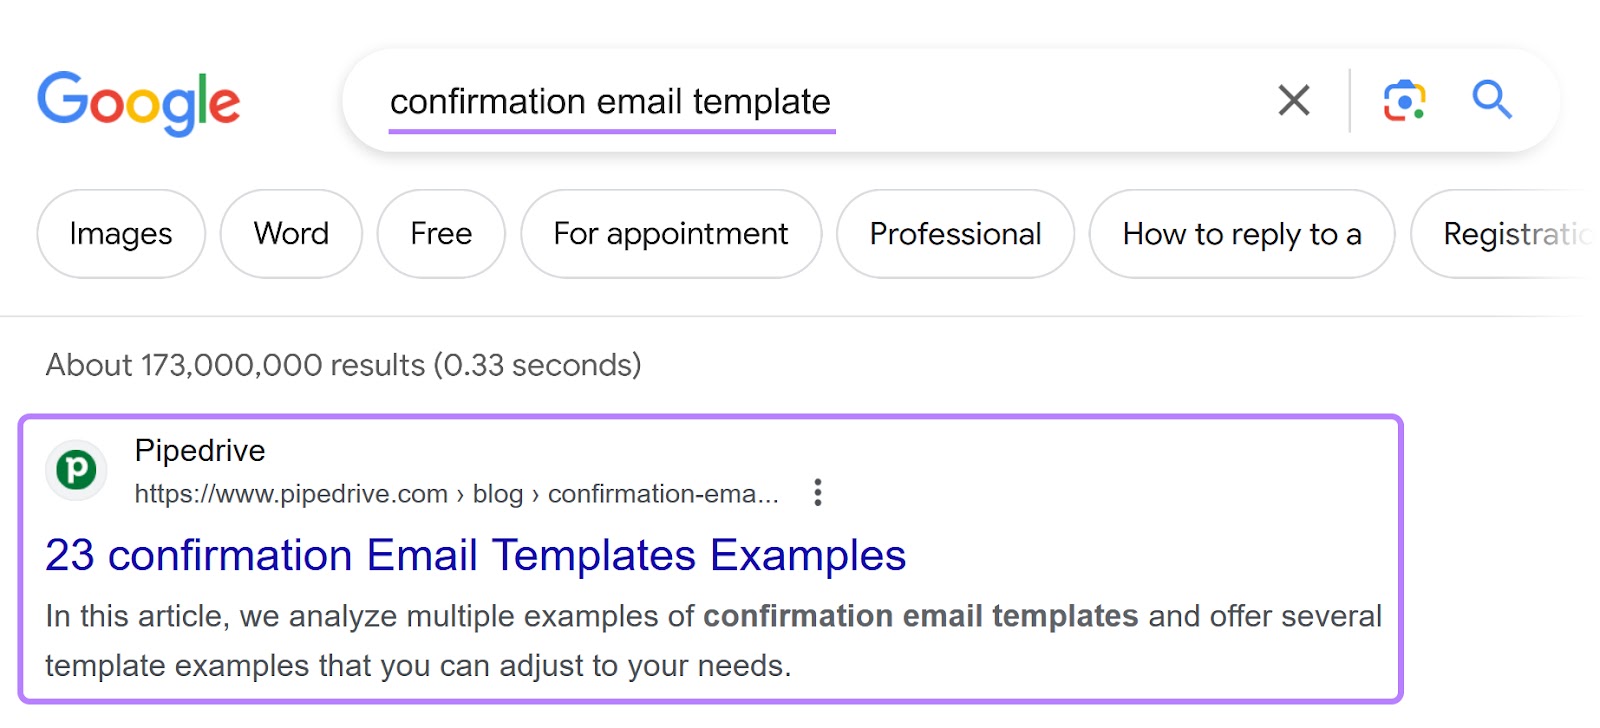 Pipedrive's result on Google SERP for “confirmation email template” query